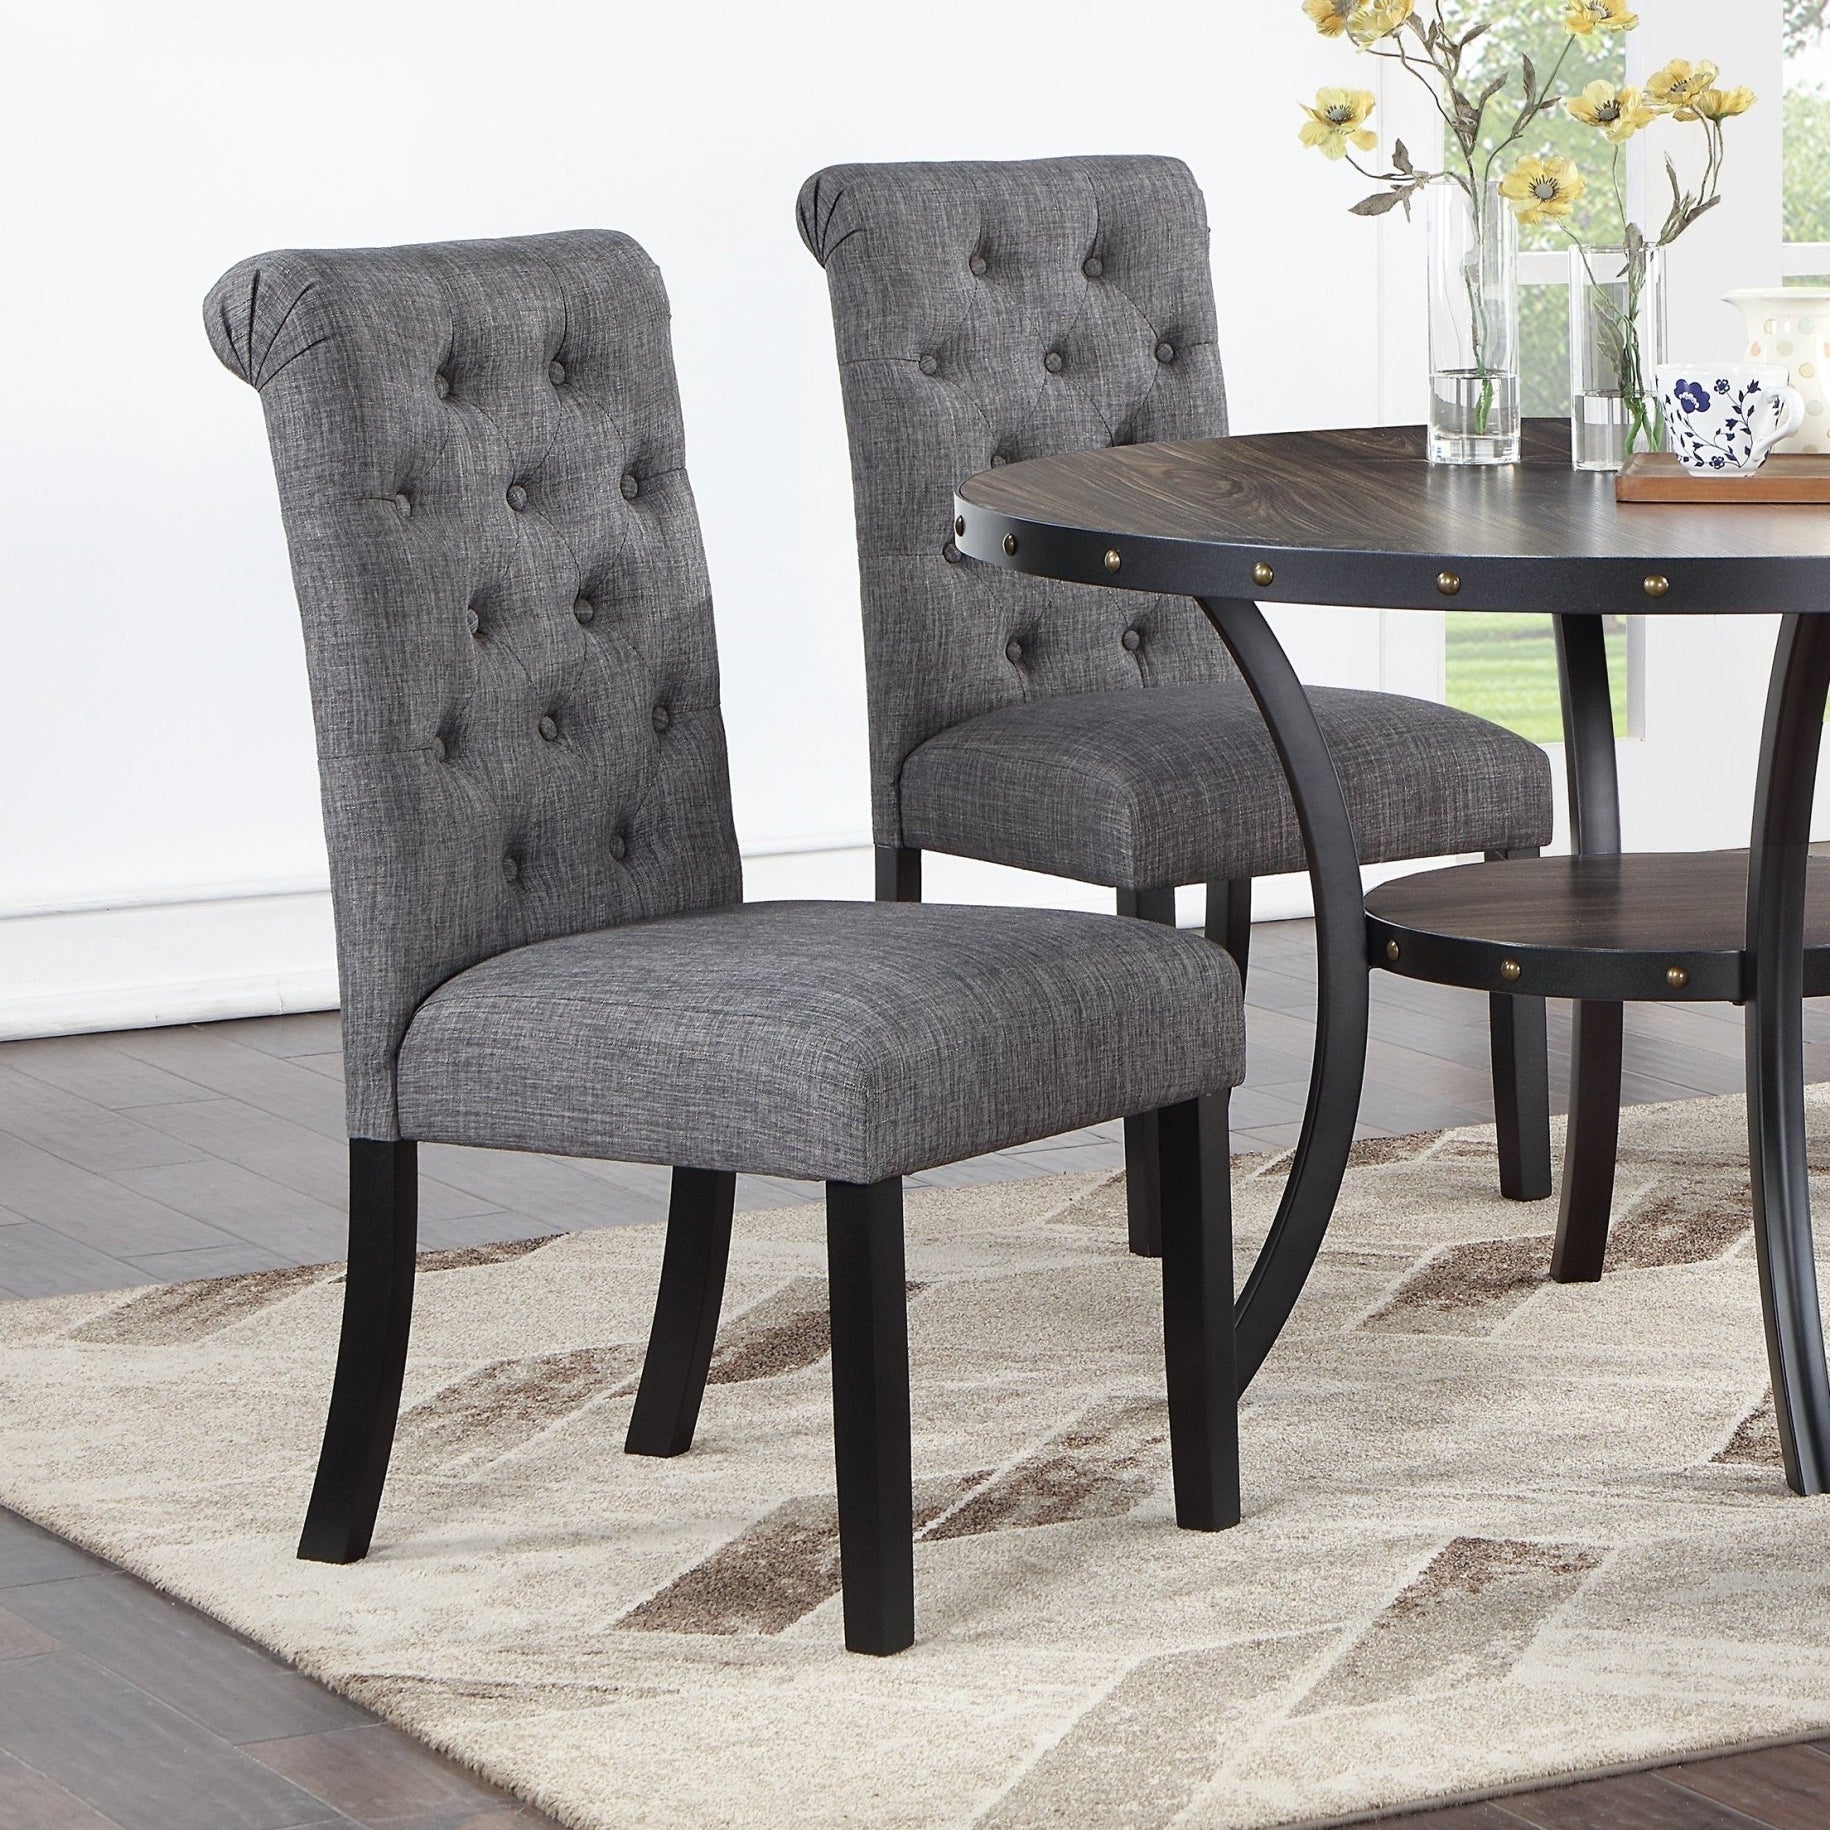 Dining-Chairs-with-Plush-Cushion-and-Tufted-Back,-Set-of-2-Dining-Chairs